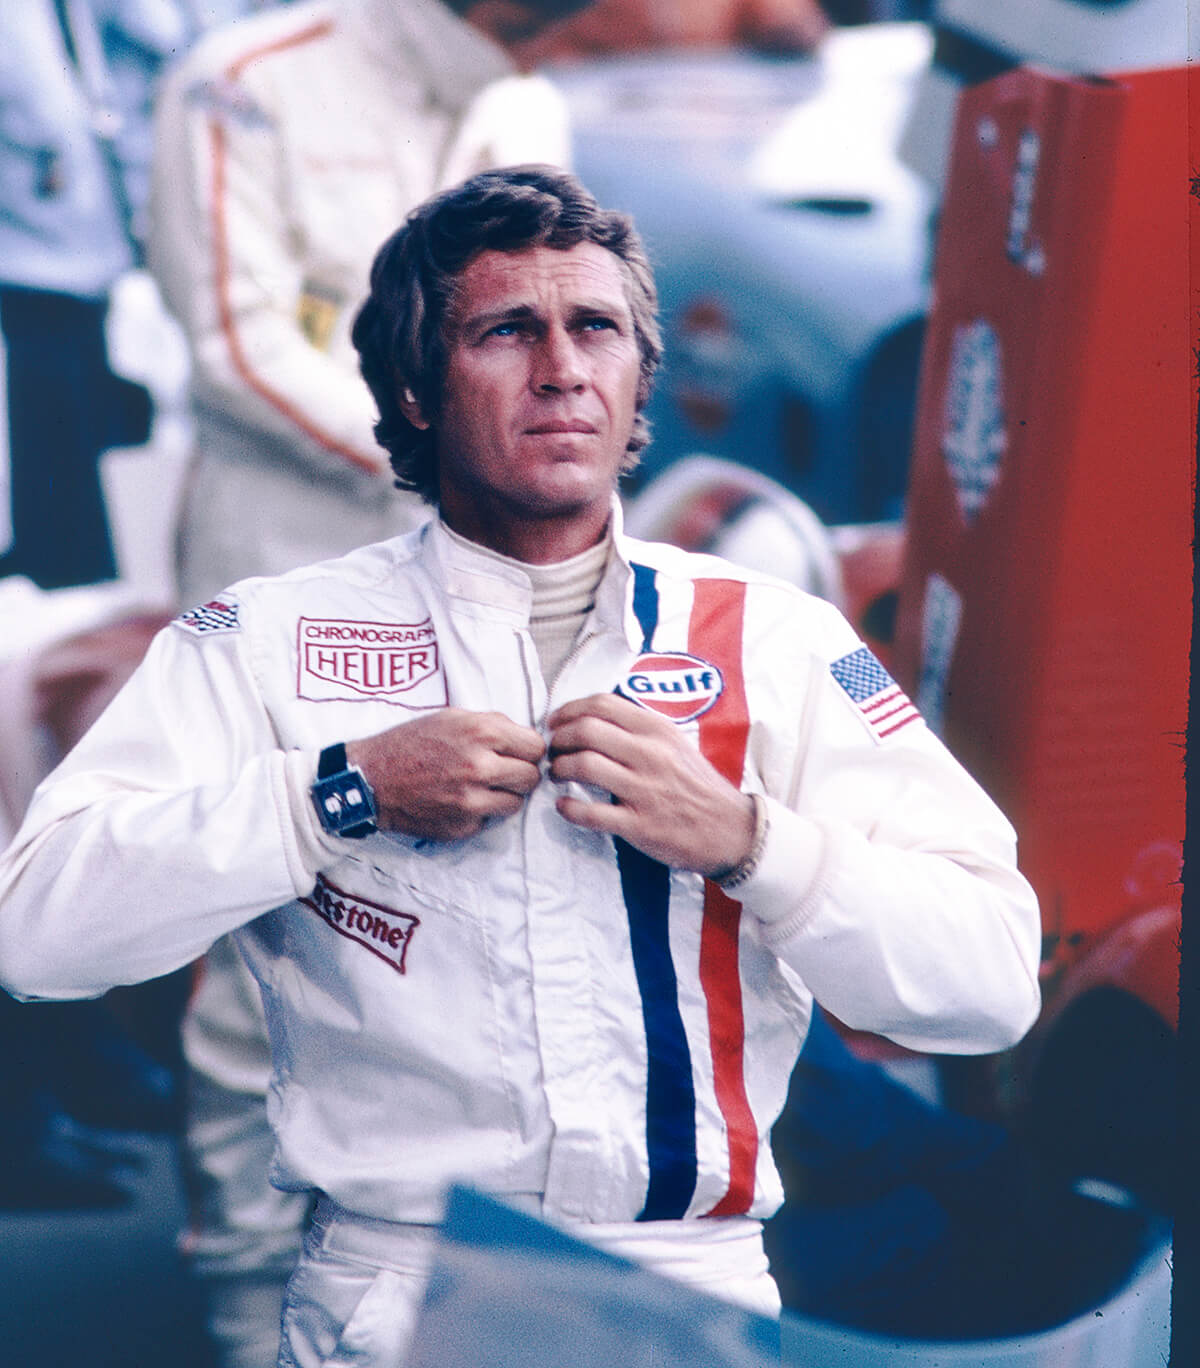 Steve McQueen as a racing driver in the 1971 film Le Mans